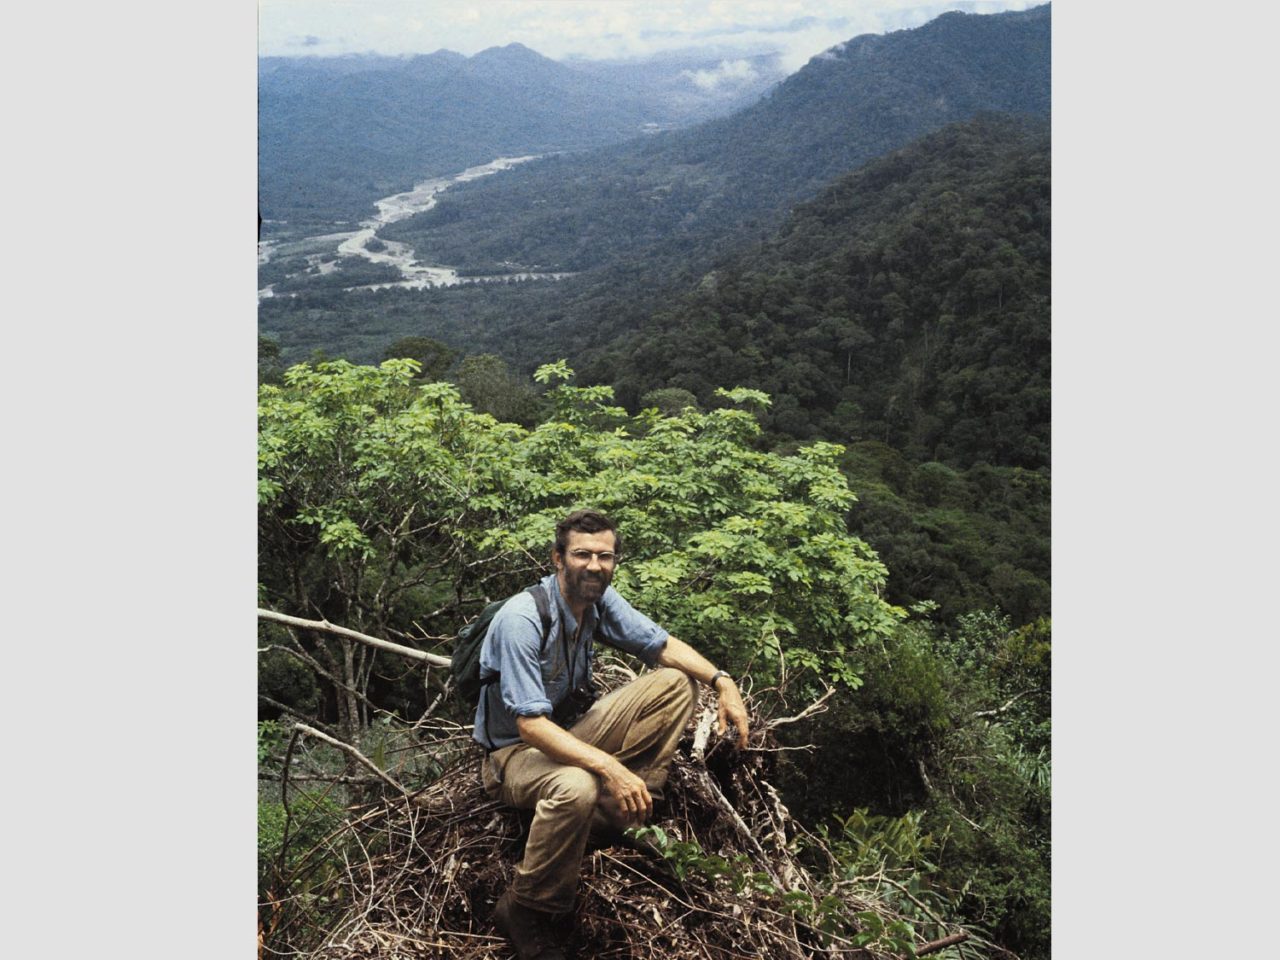 John Fitzpatrick on mountaintop in Peru overlooking river valley